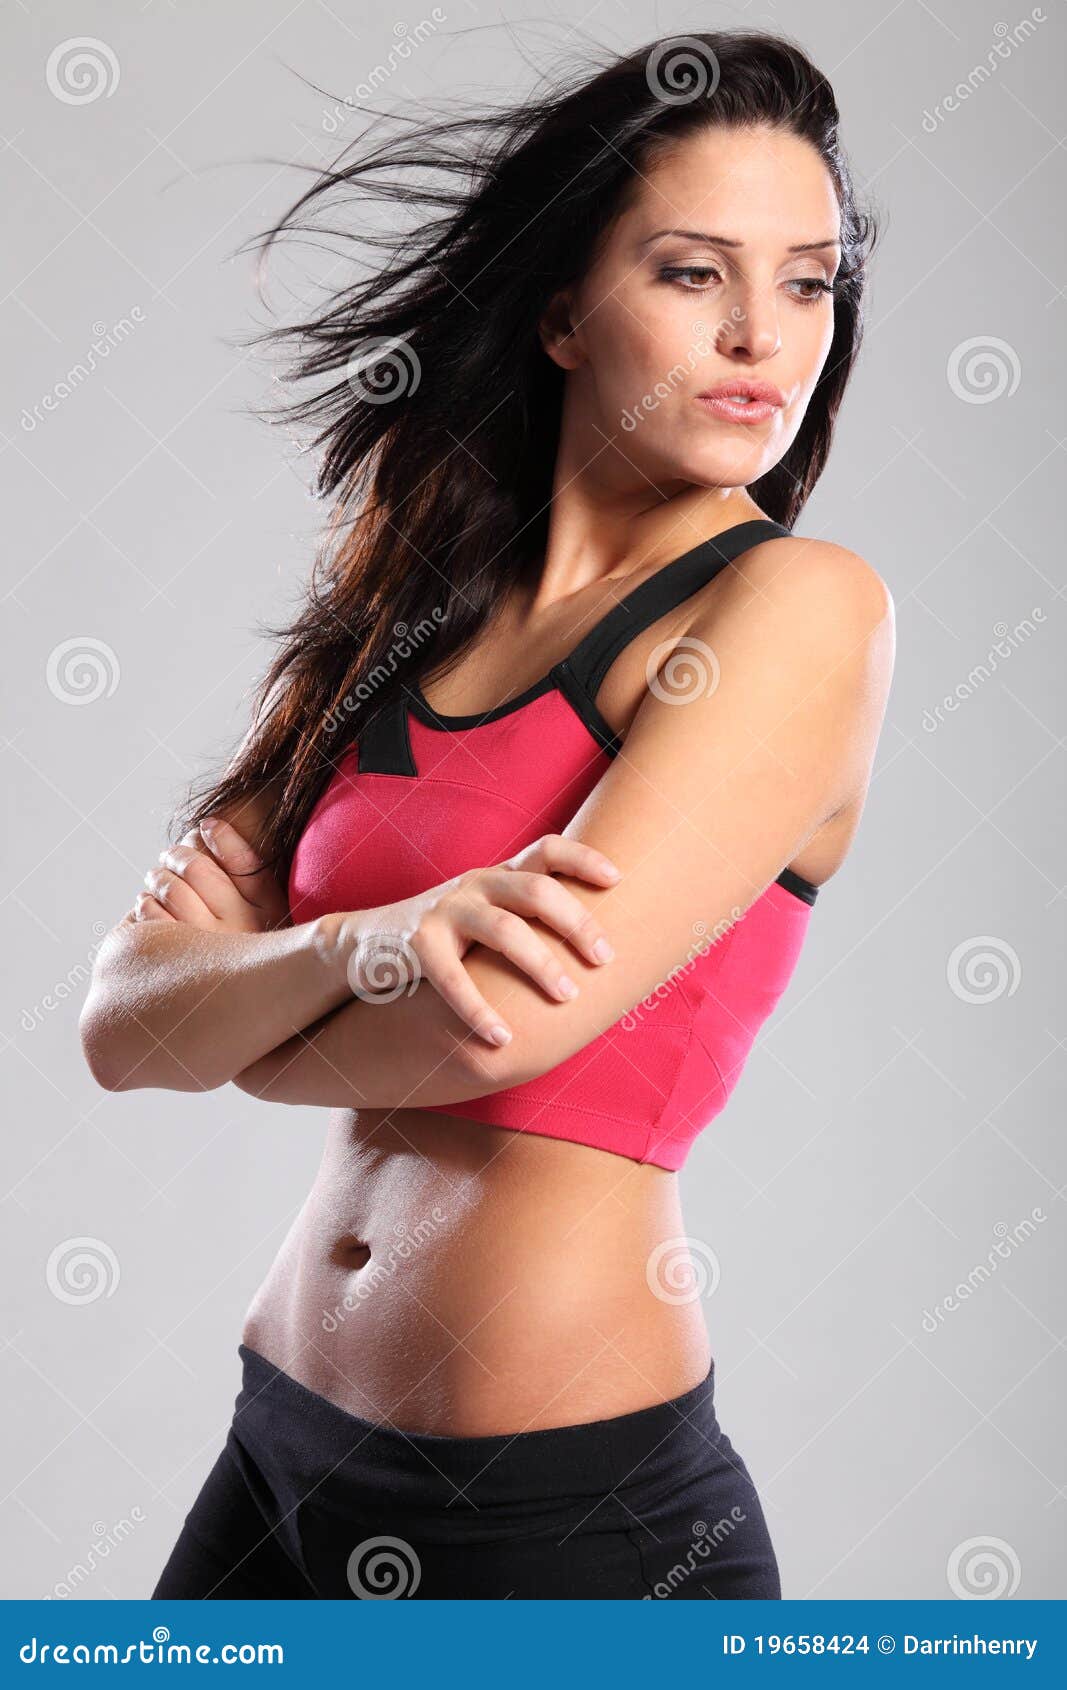 An Older Woman In A Sports Bra Folding Her Arms. Stock Photo, Picture and  Royalty Free Image. Image 25390254.